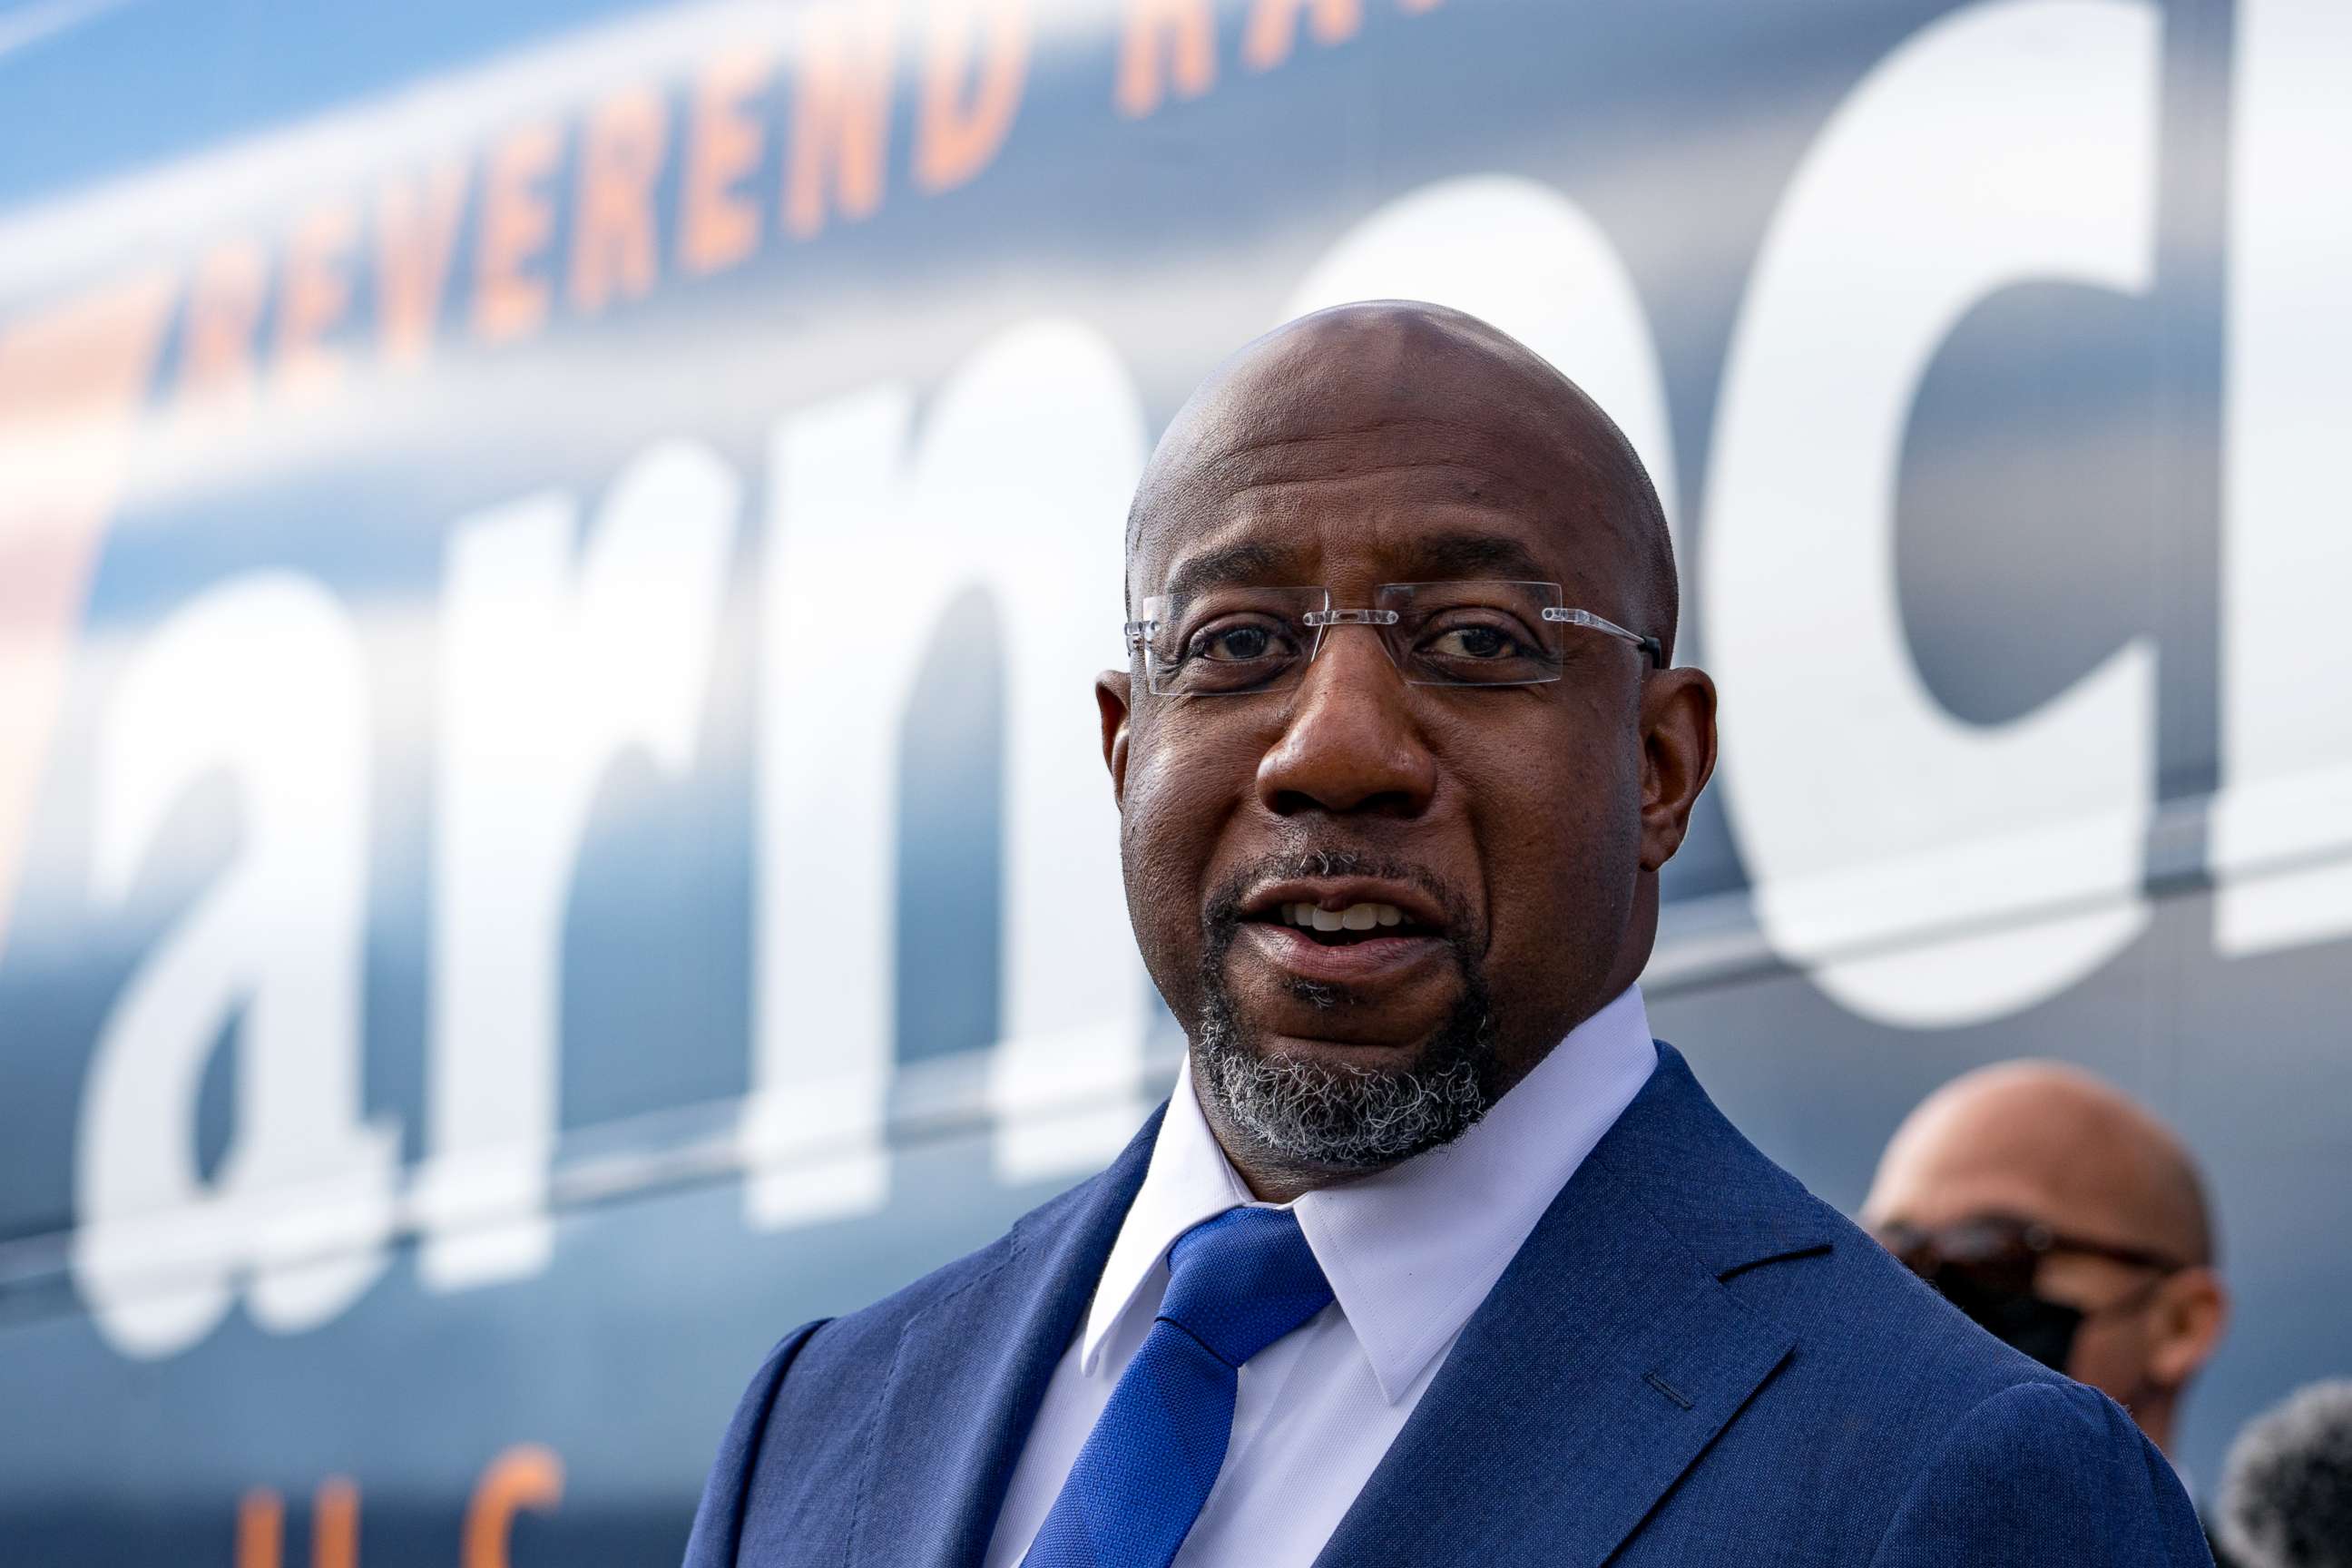 PHOTO: Democratic Senate candidate Raphael Warnock appears at a small rally with young campaign volunteers on election day in Georgia's U.S. Senate runoff election, in Marietta, Ga., Jan. 5, 2021.